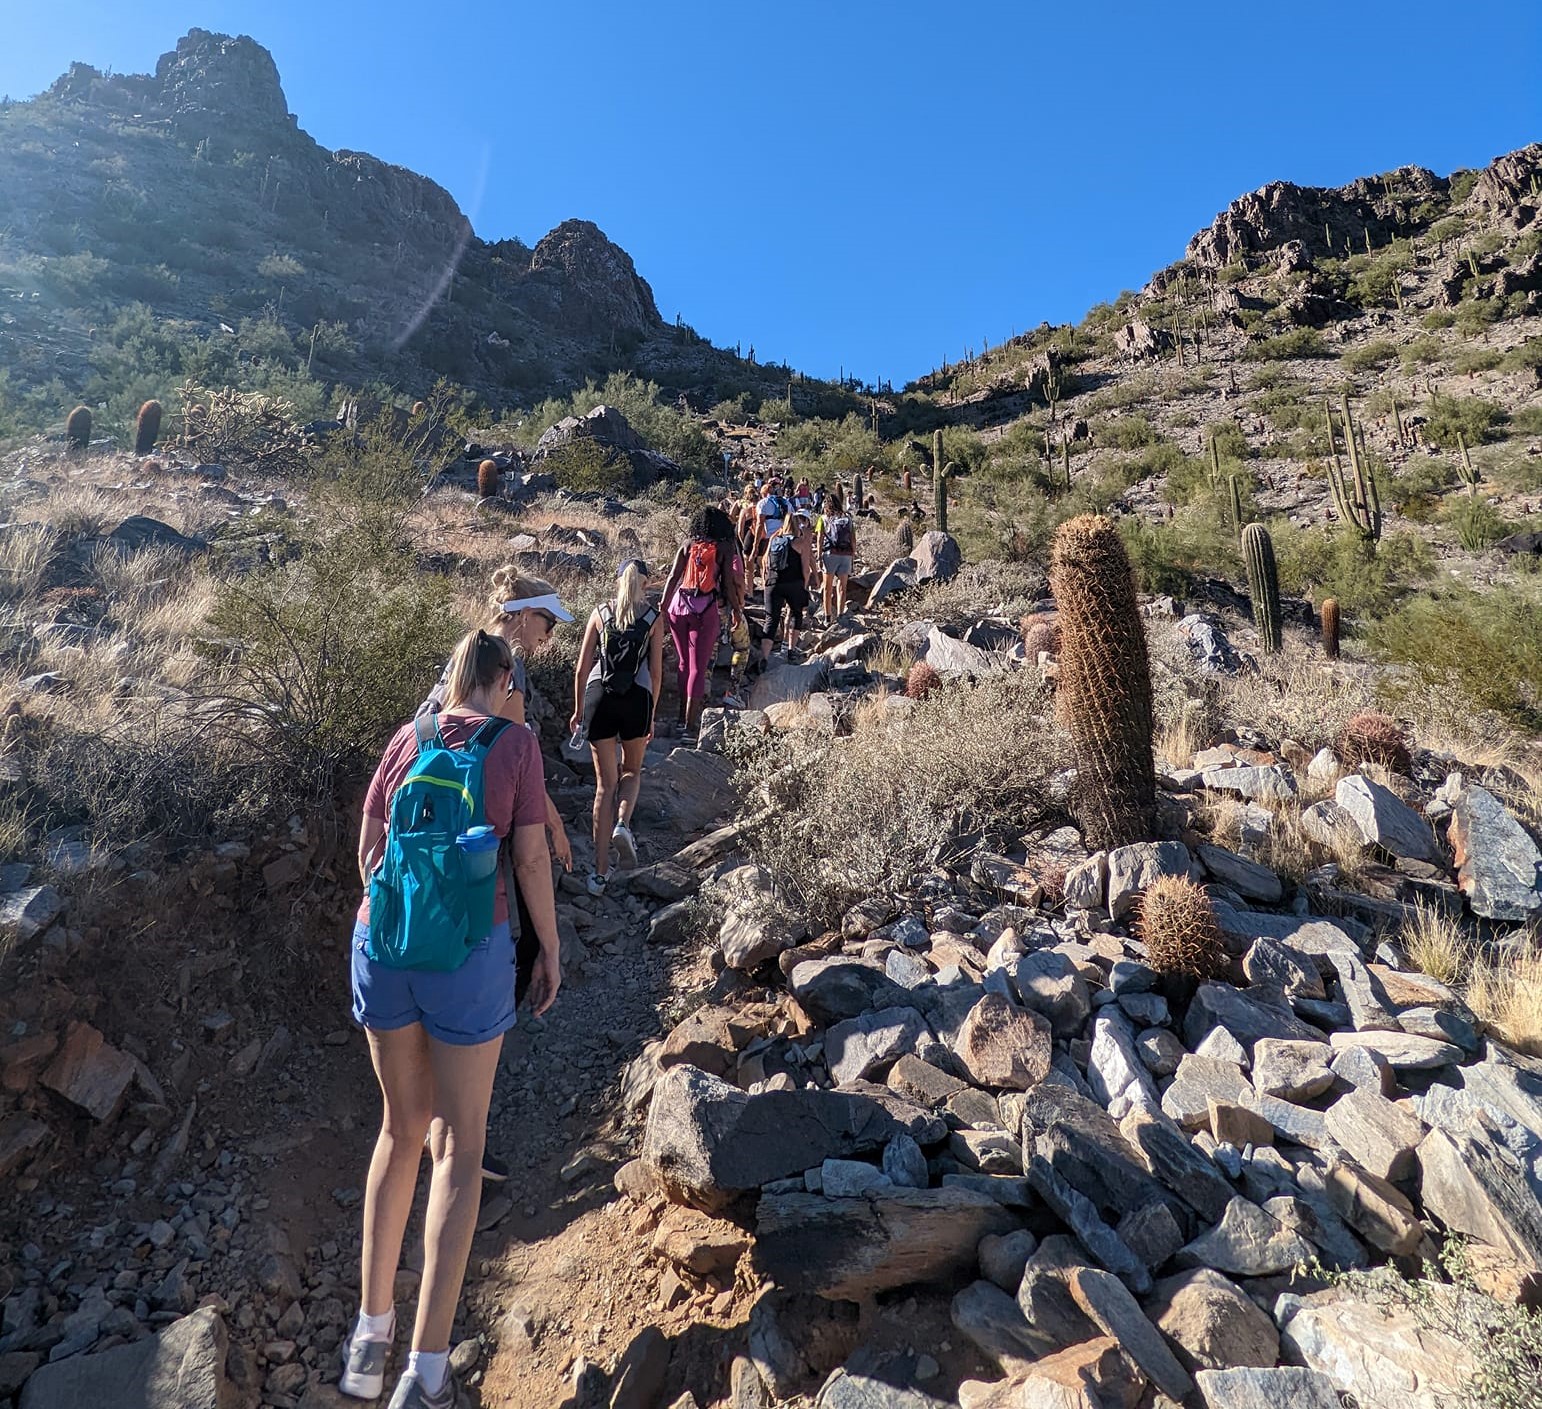 The Wild Bunch welcomed a Phoenix hiking tours group of 77 women in November.